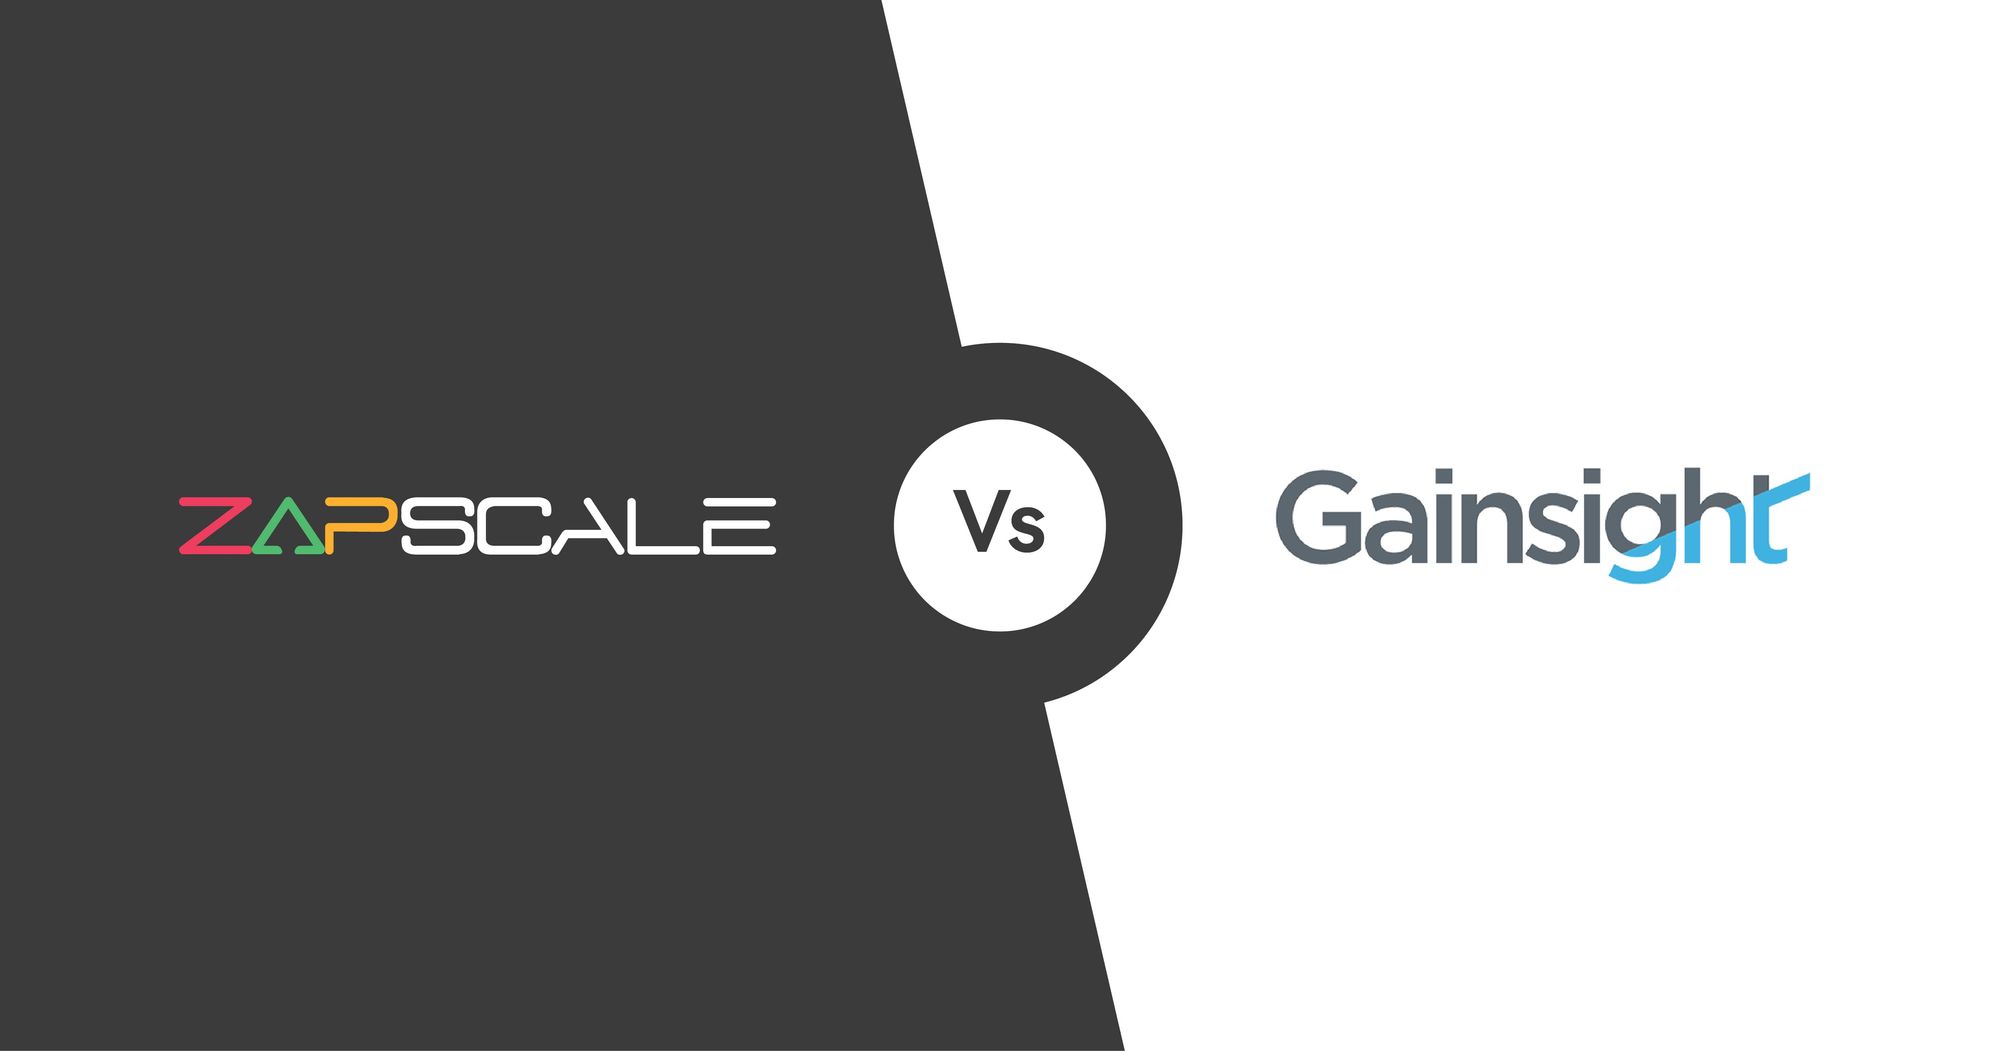 ZapScale vs. Gainsight: Which is best for your team?